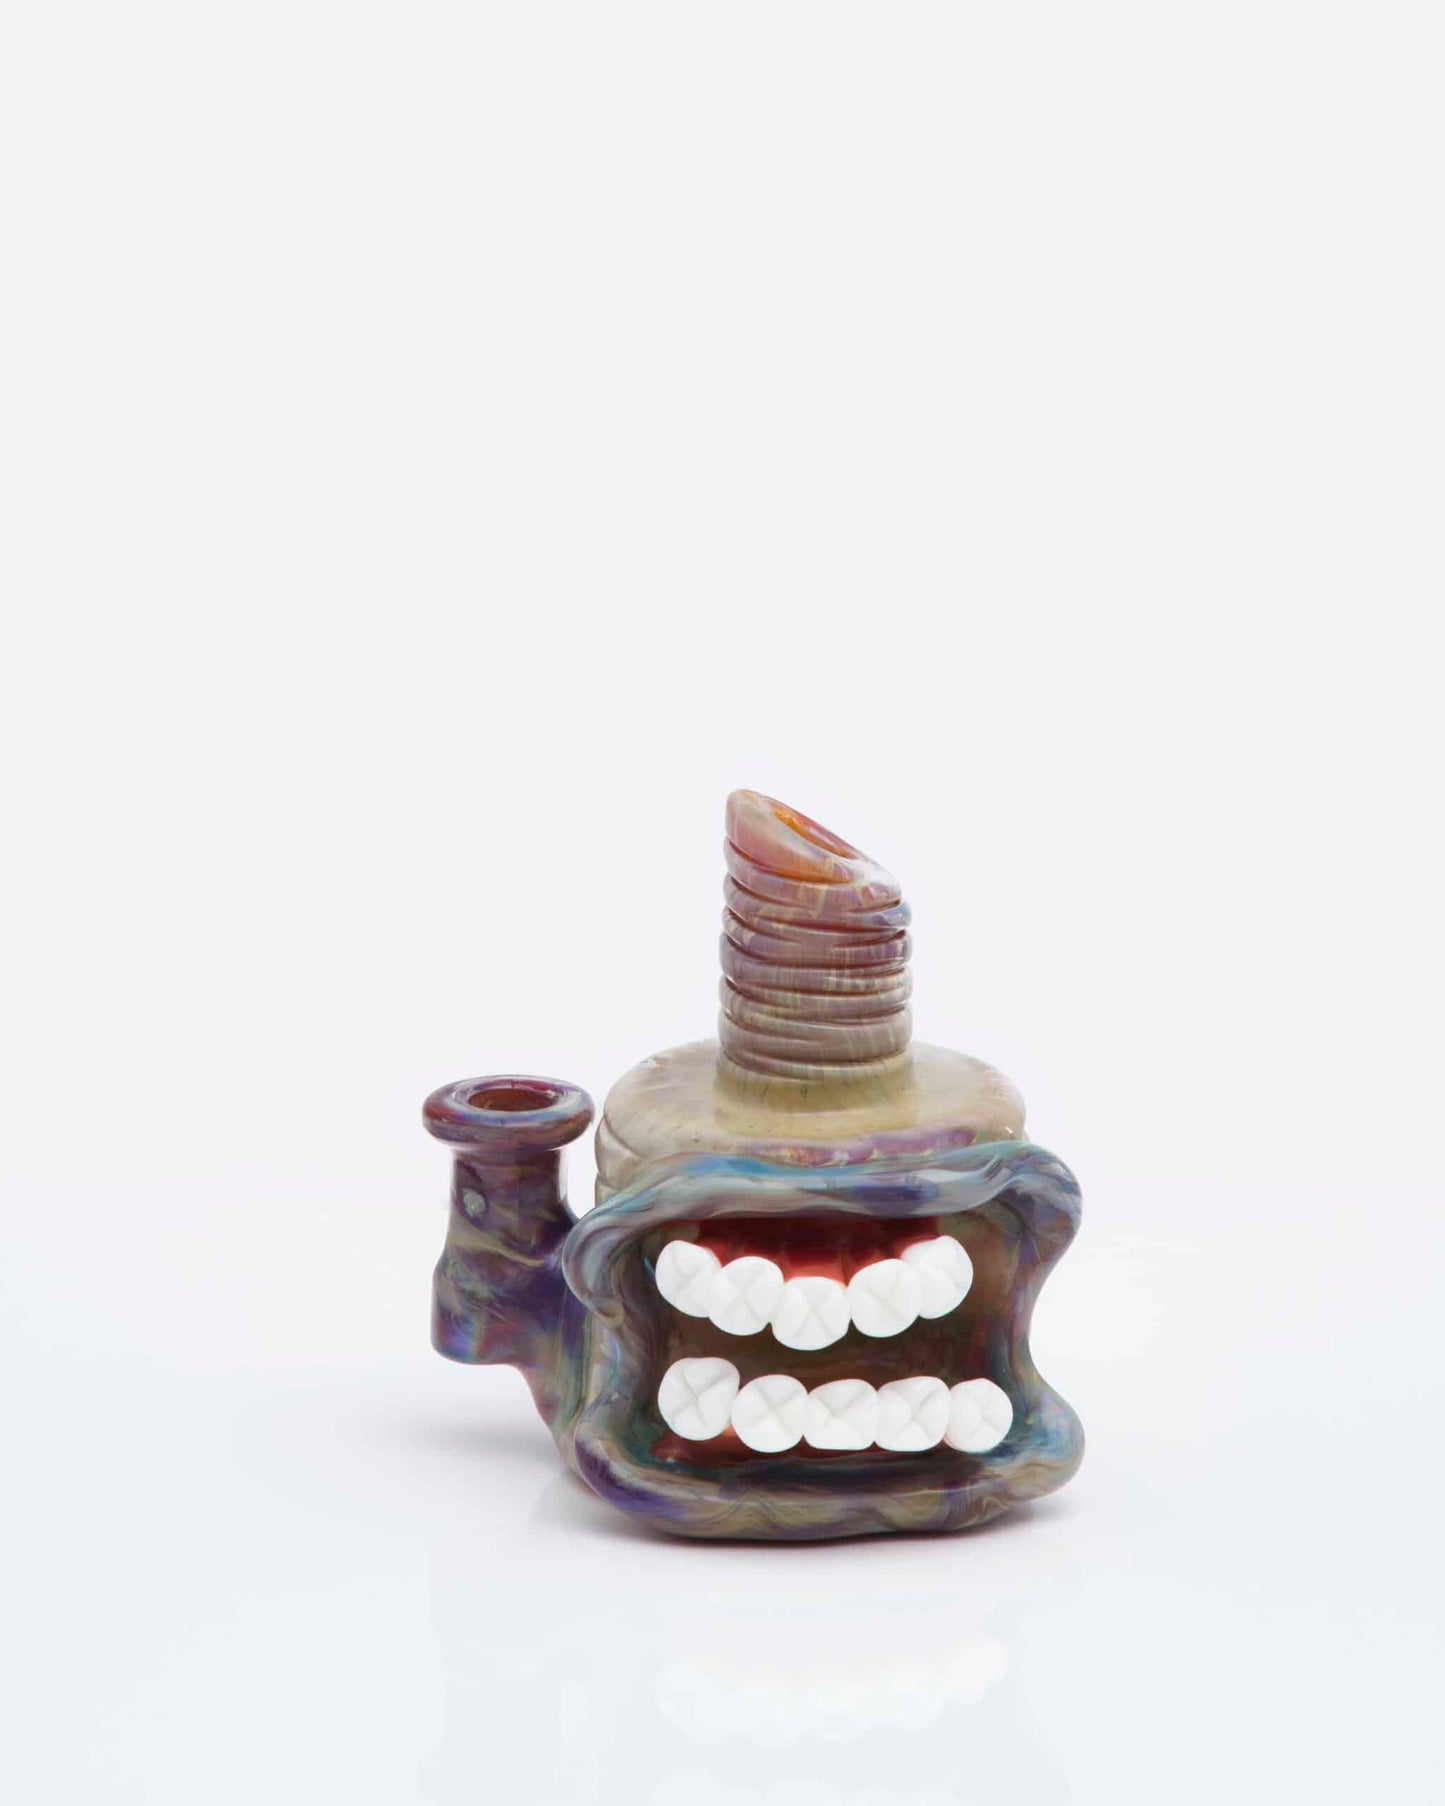 hand-blown design of the Persimmon Strike Mini Face Rig w/ Matching Carb Cap by FrostysFresh